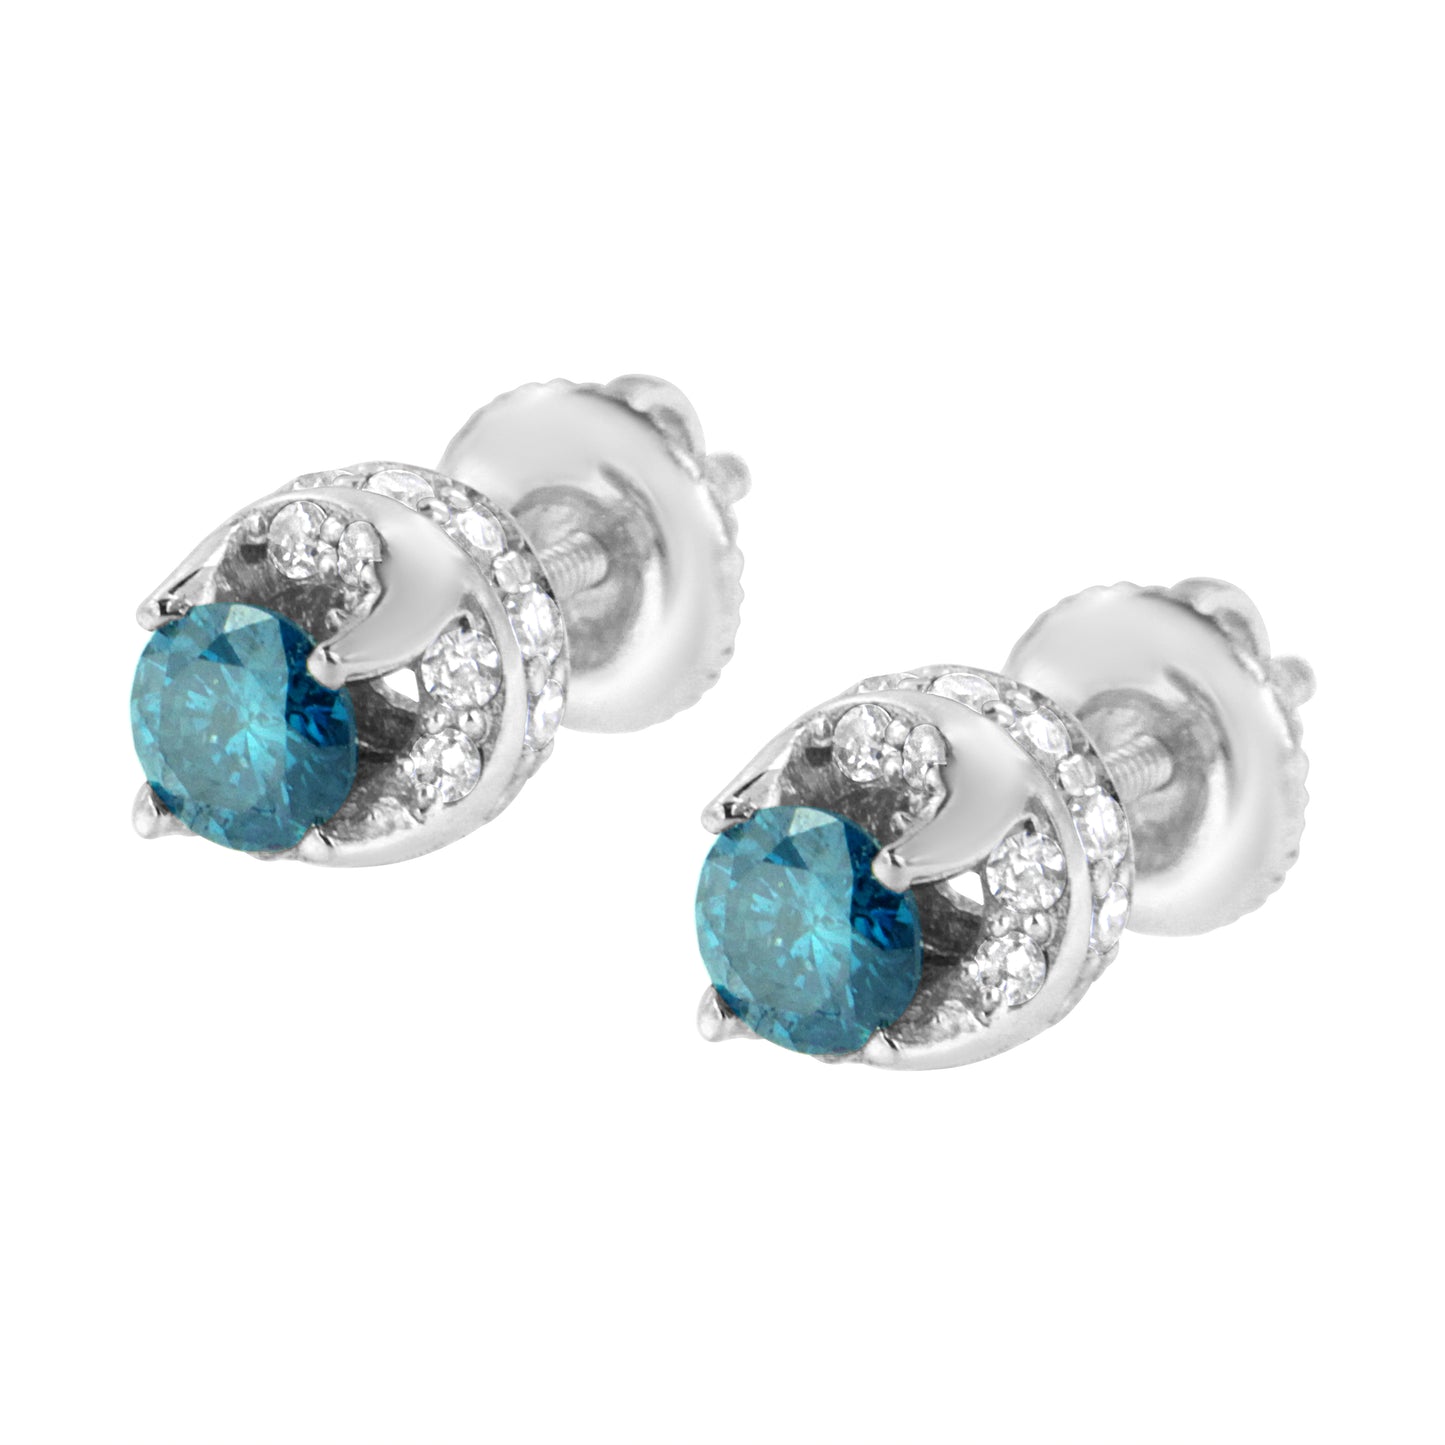 1.00 cttw Treated Blue and White Diamond Hidden Halo Stud Earrings in 14K White Gold